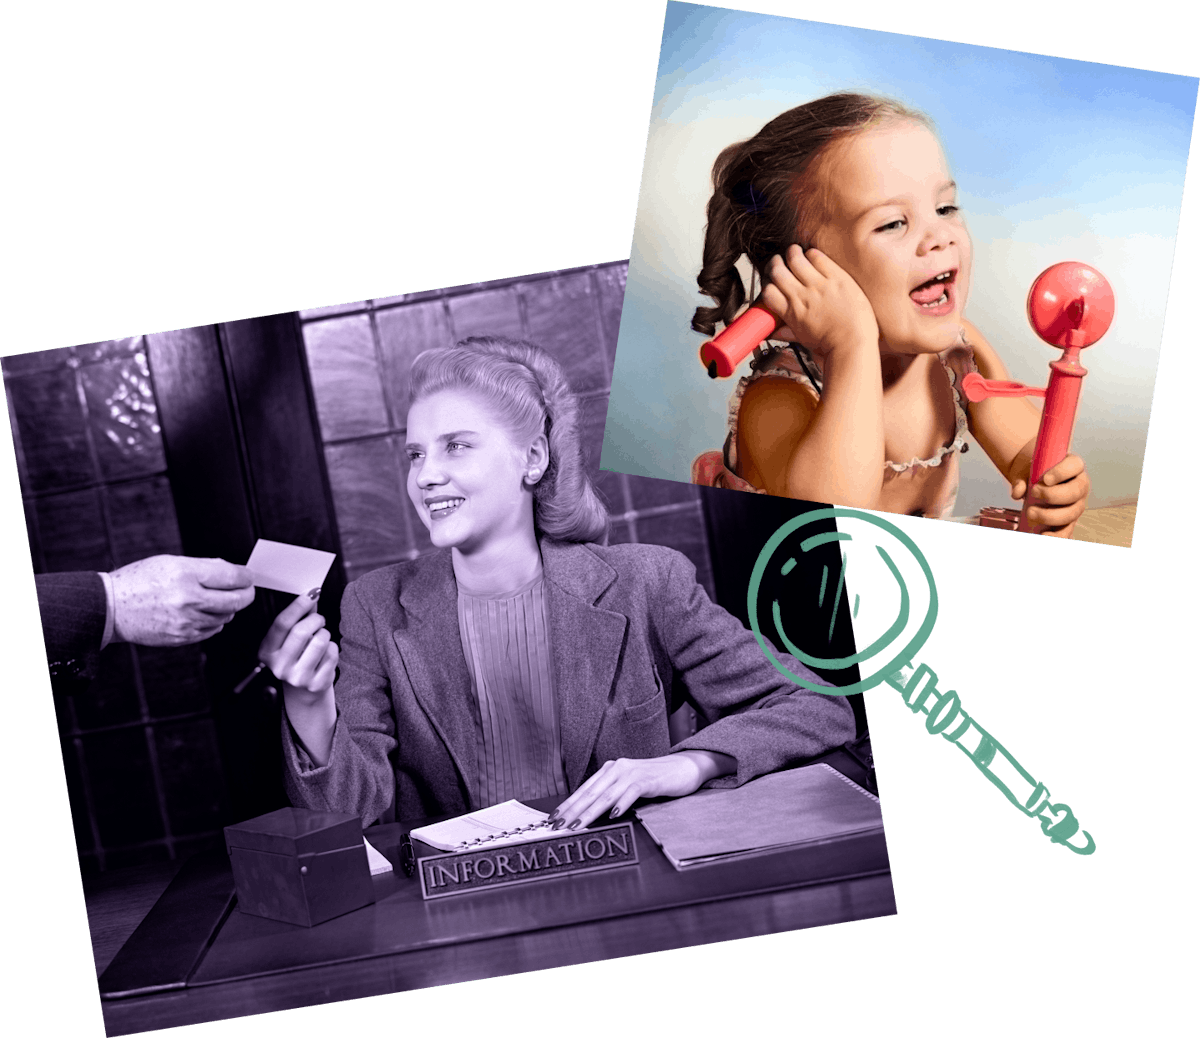 A black-and-white photograph of a woman working at an information desk, and a bright photograph of a young girl playing with a toy telephone